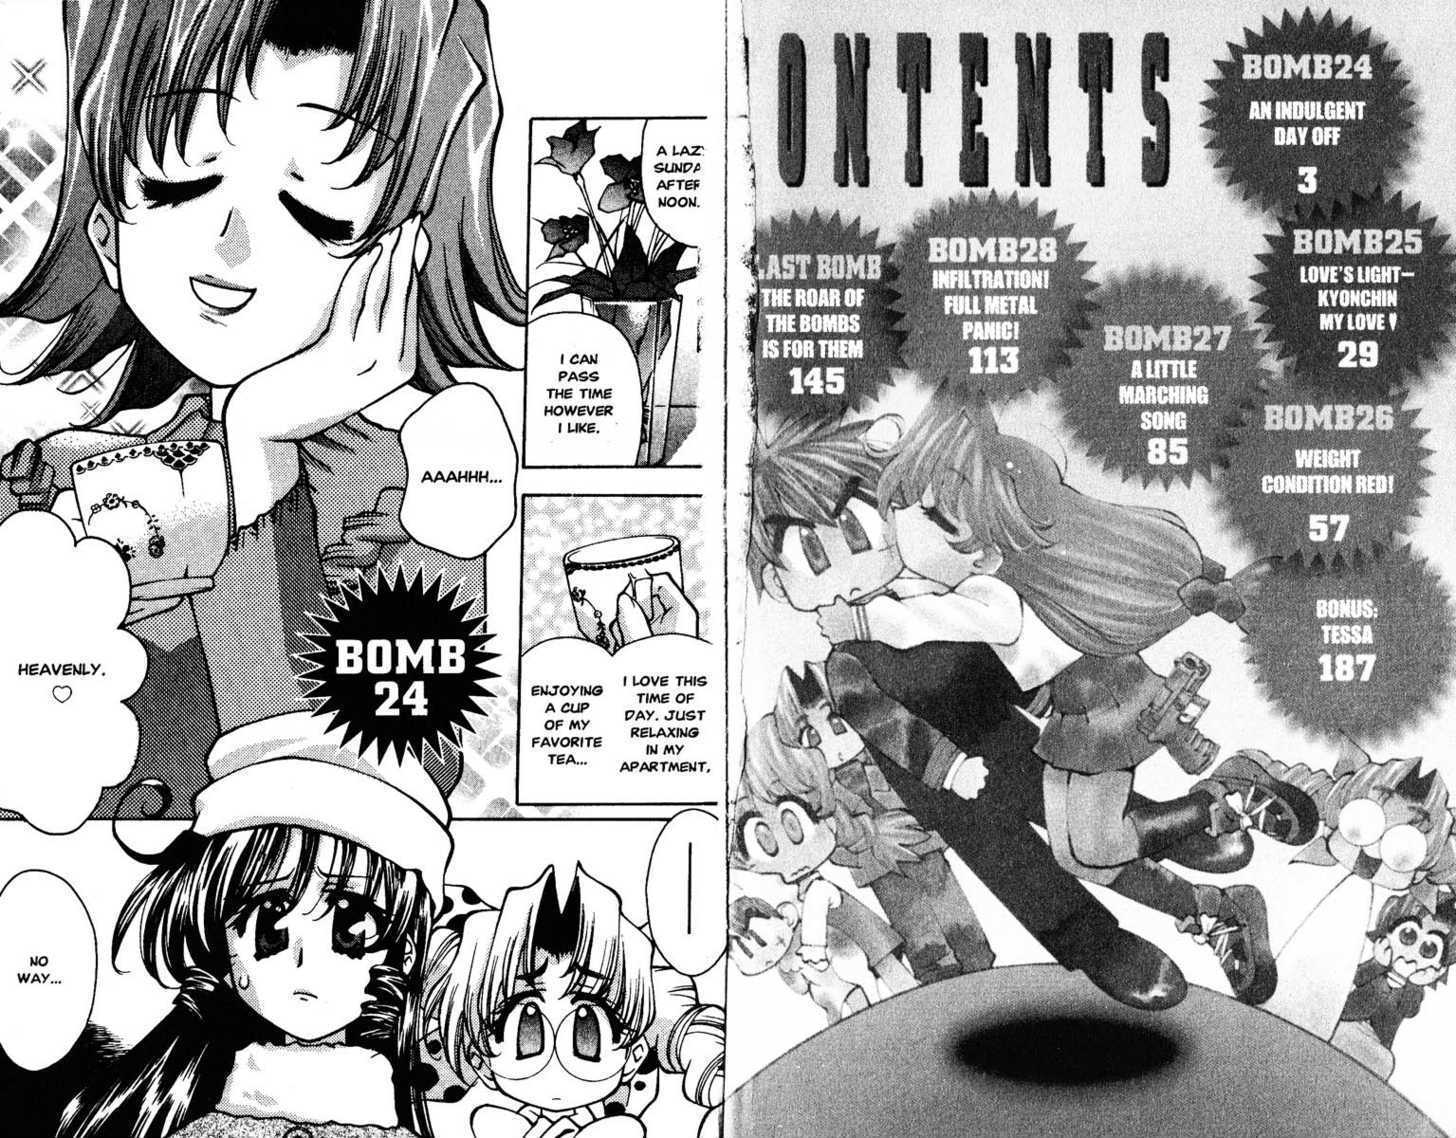 Full Metal Panic! Overload Vol.5 Chapter 24 : An Indulgent Day Off - Picture 3